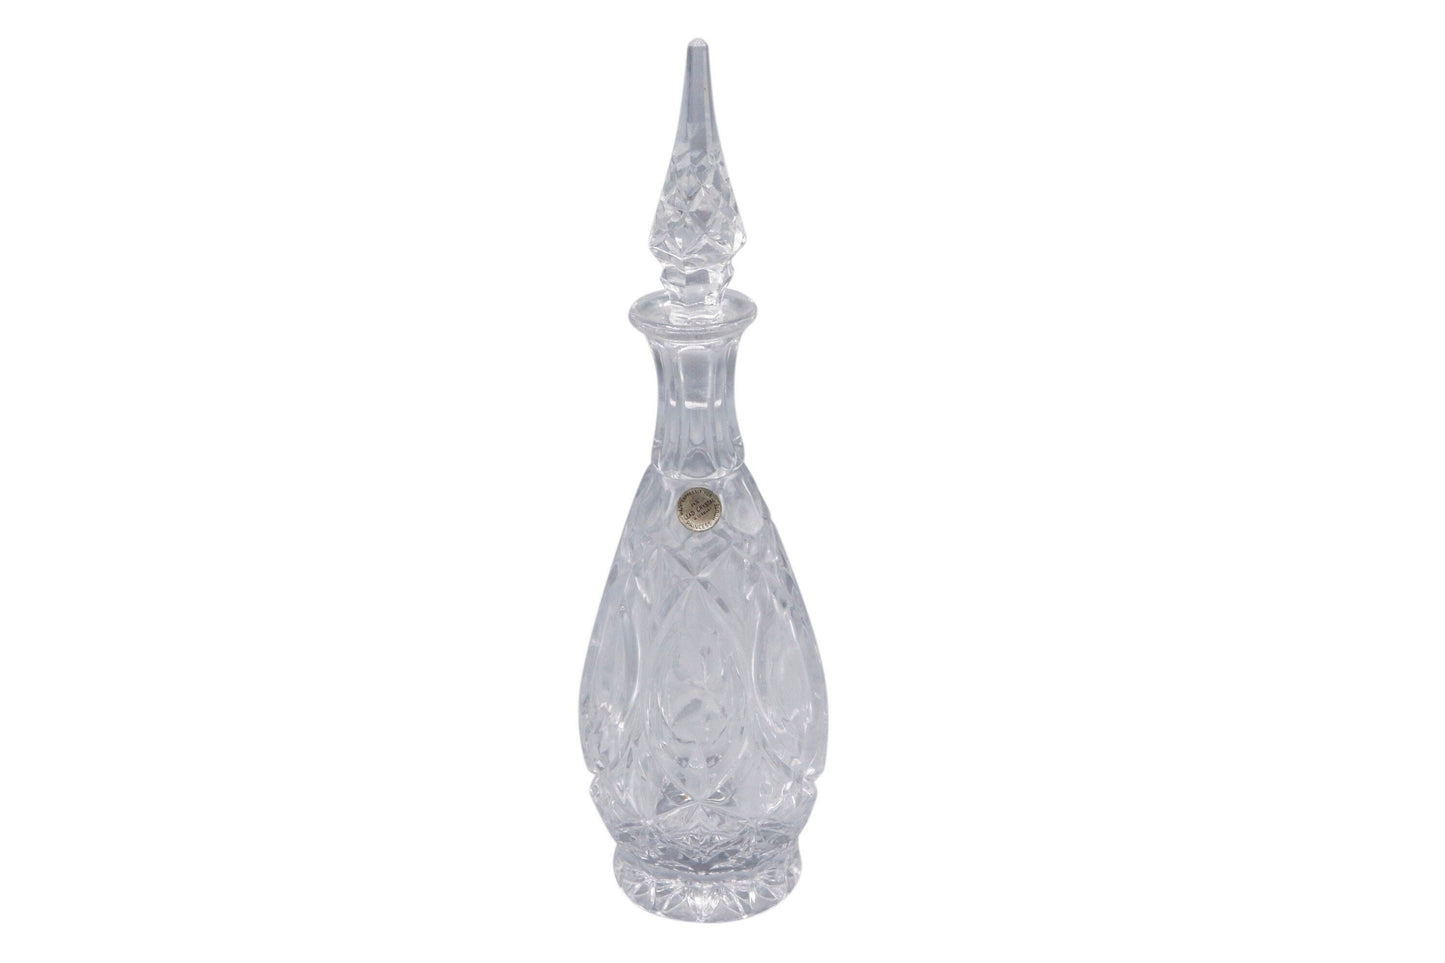 Art deco Crystal handmade decanter with the stopper design by west Germany.